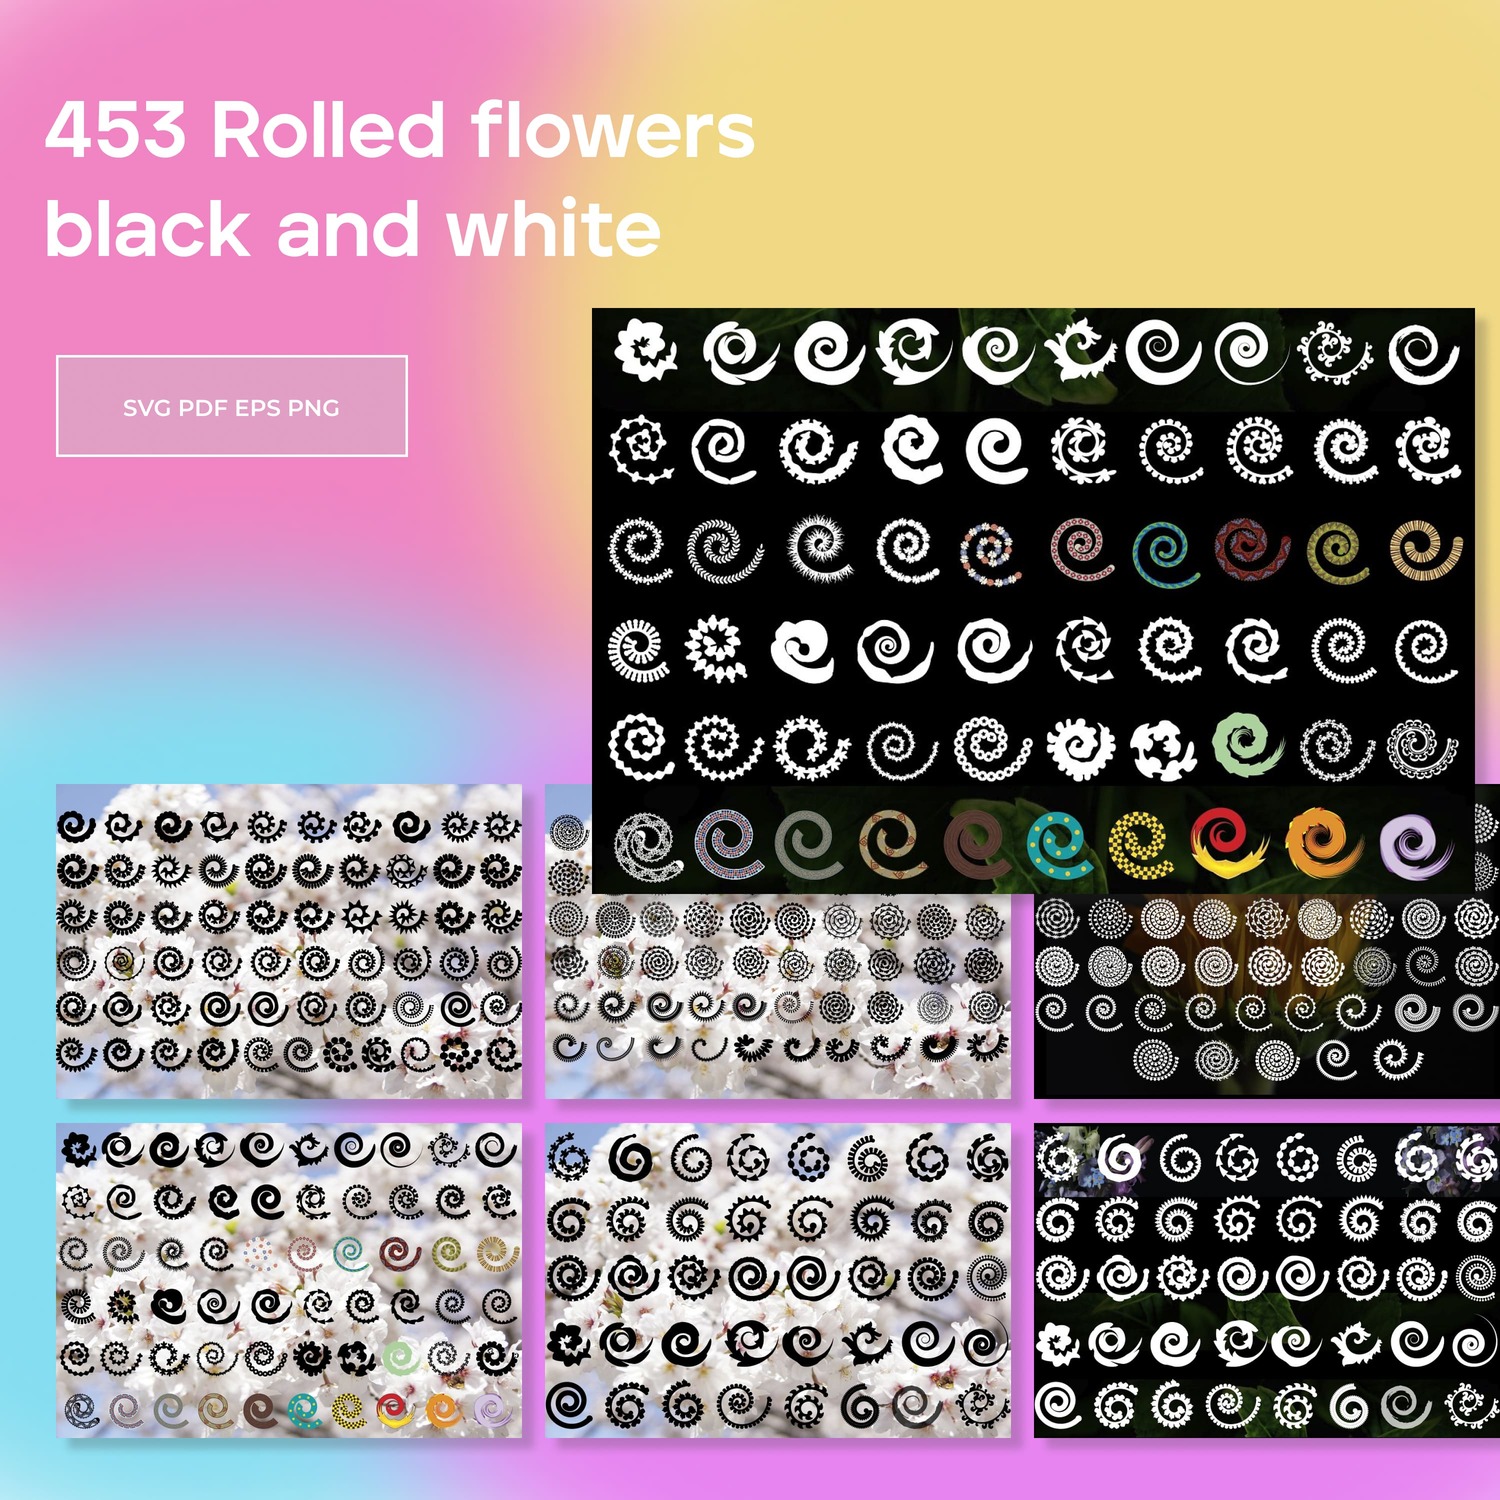 453 Rolled flowers black and white main cover.